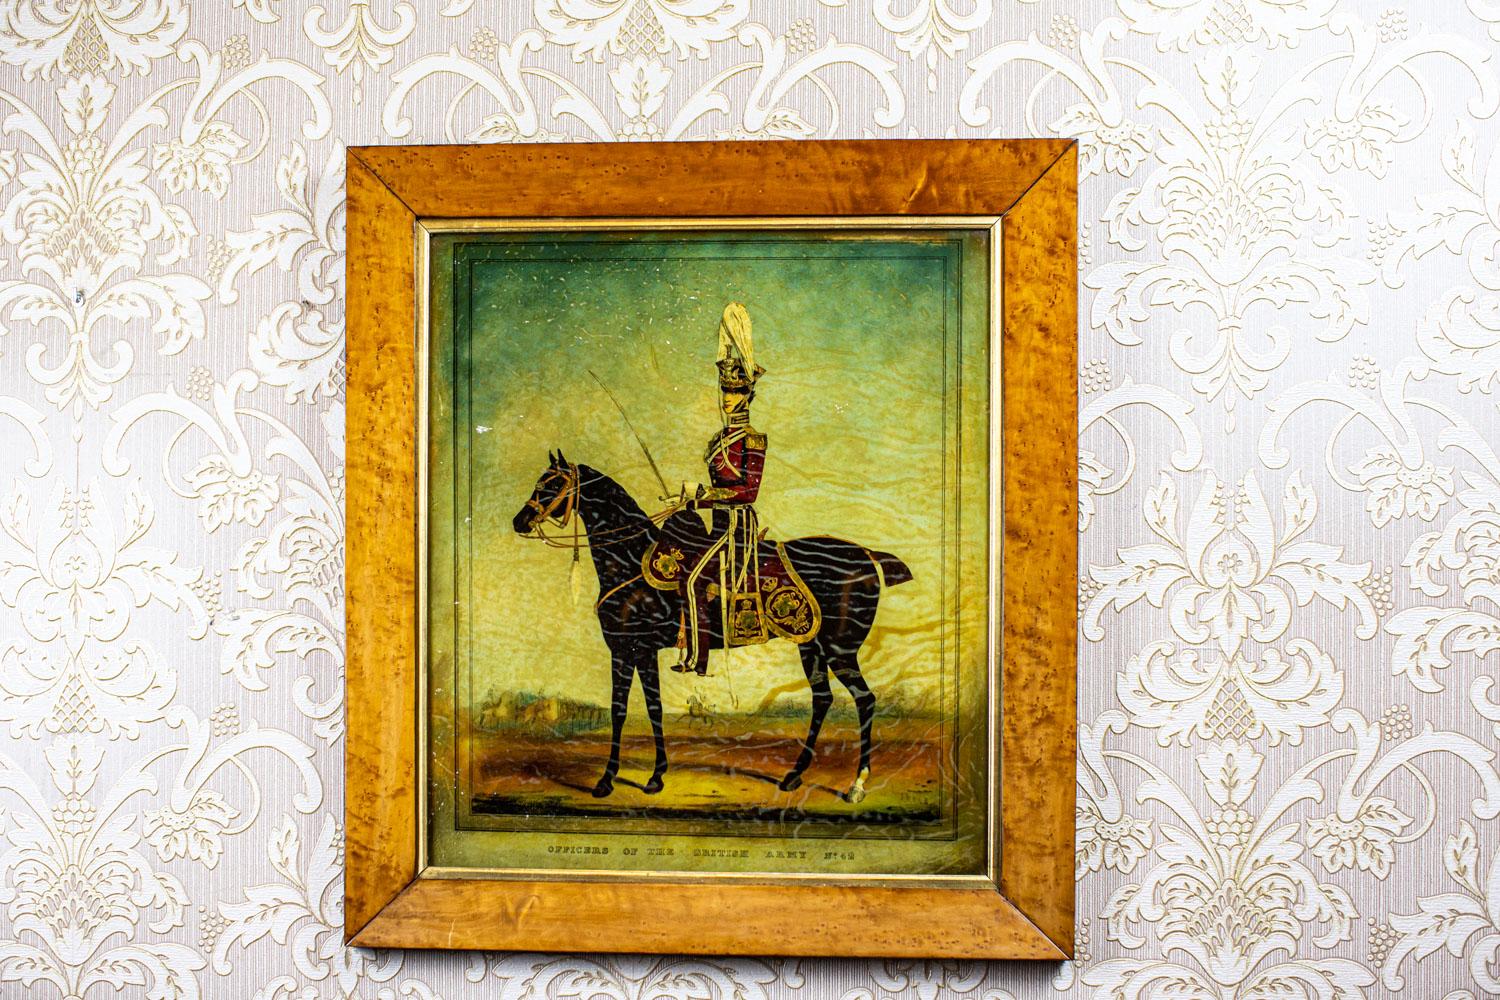 British Army Officers, Set of Early 20th Century Paintings on Glass

A set of three paintings from the beginning of 20th century. Painted on glass with the use of the reverse painting technique.
Each painting is closed in a frame of birch burl